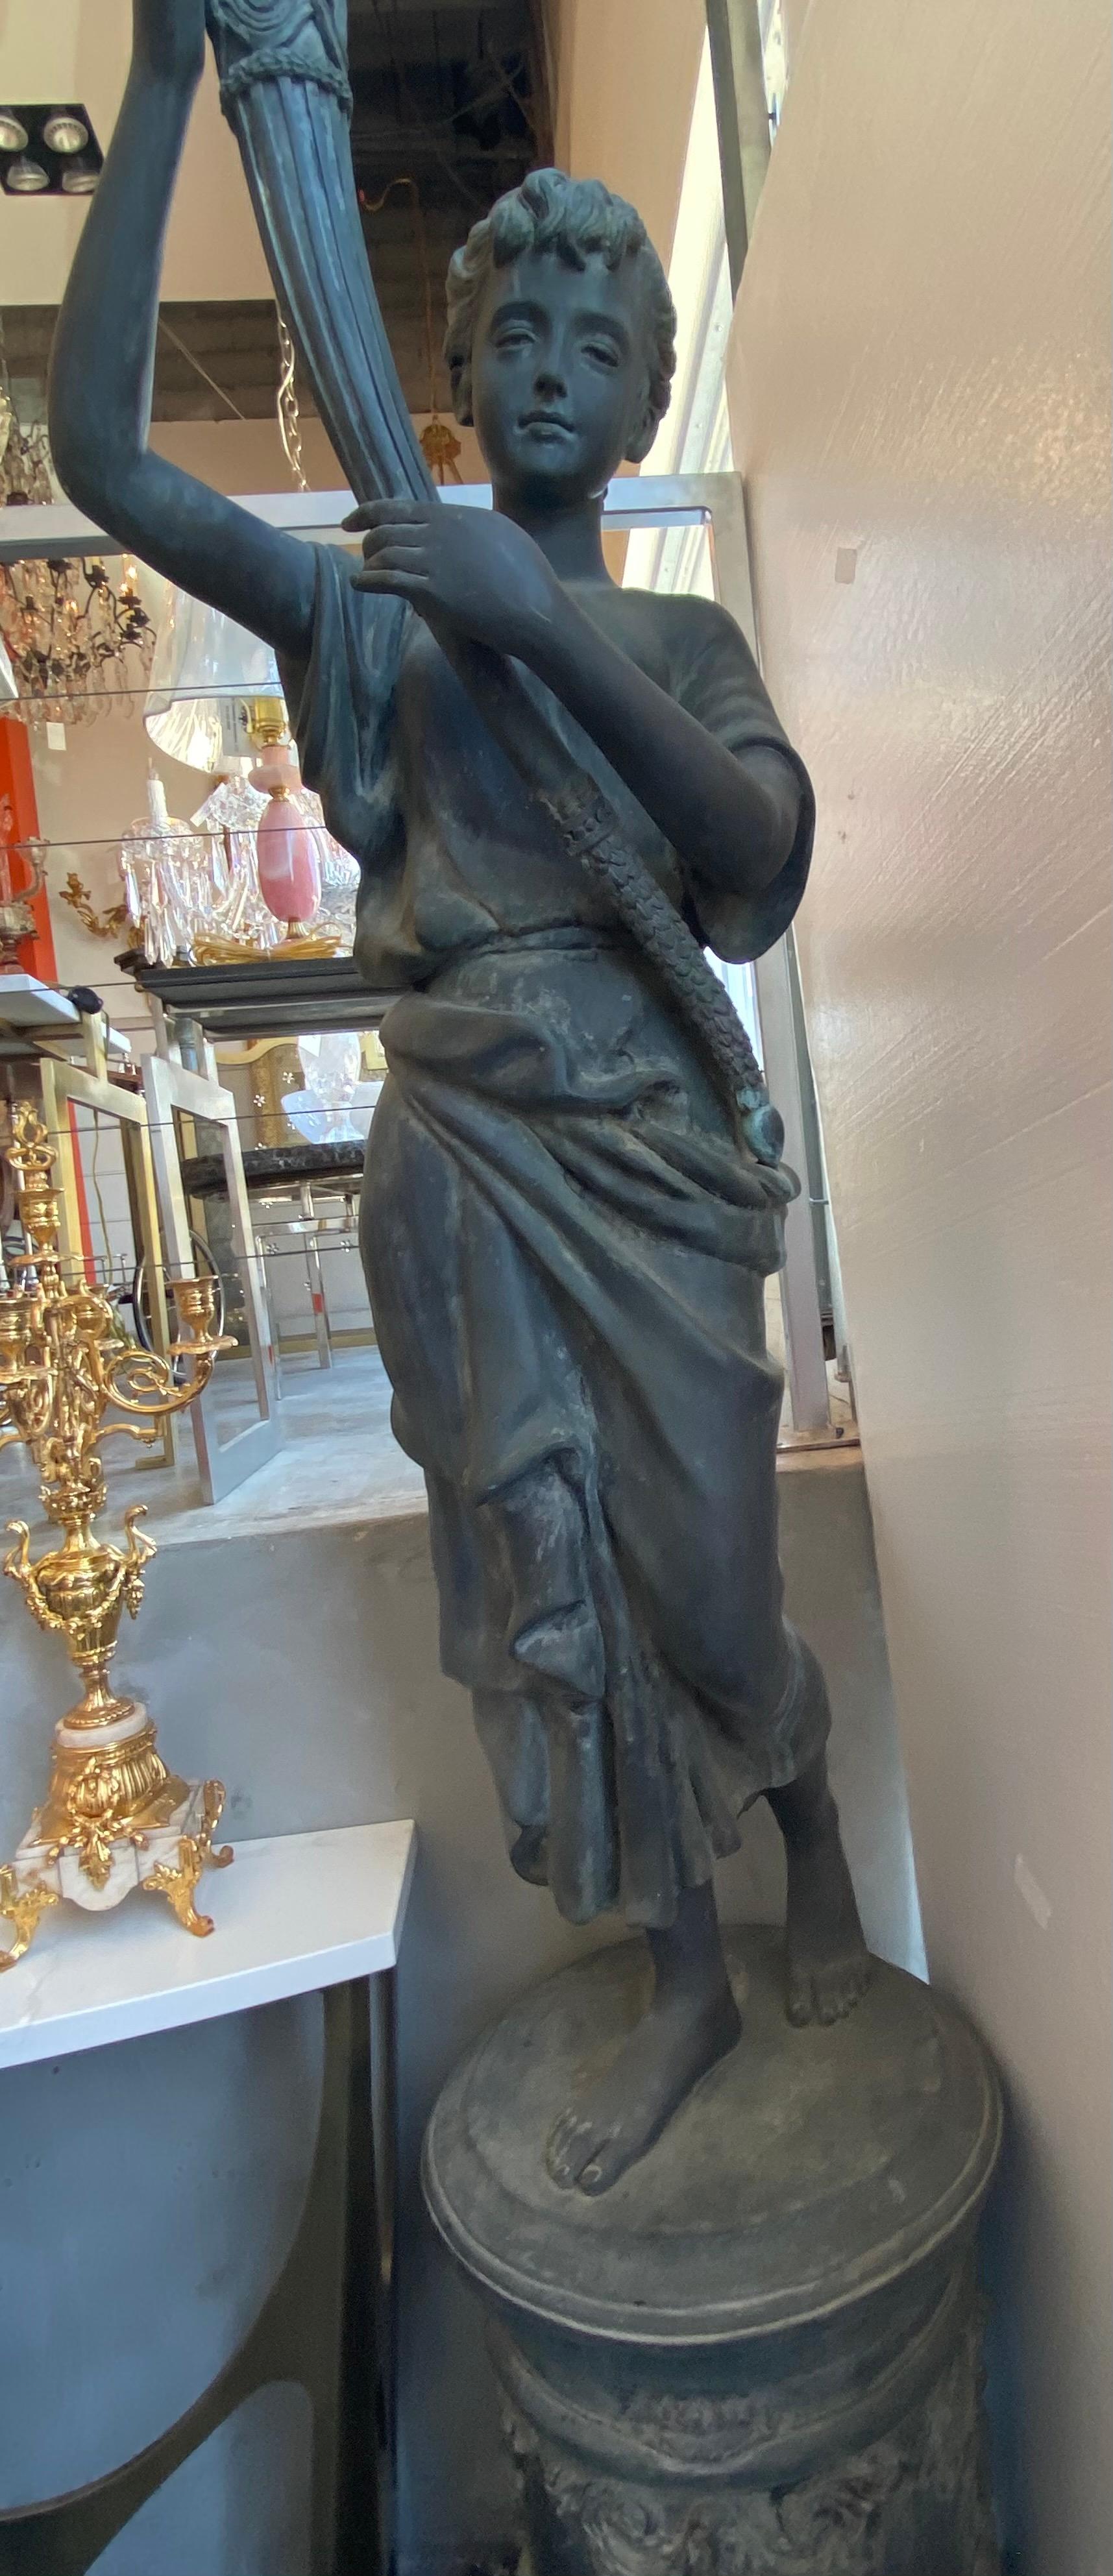 Large pair of bronze lady with torch, this bronze statue is perfect for an outdoor entry since they are large, and come with a working torch lantern.